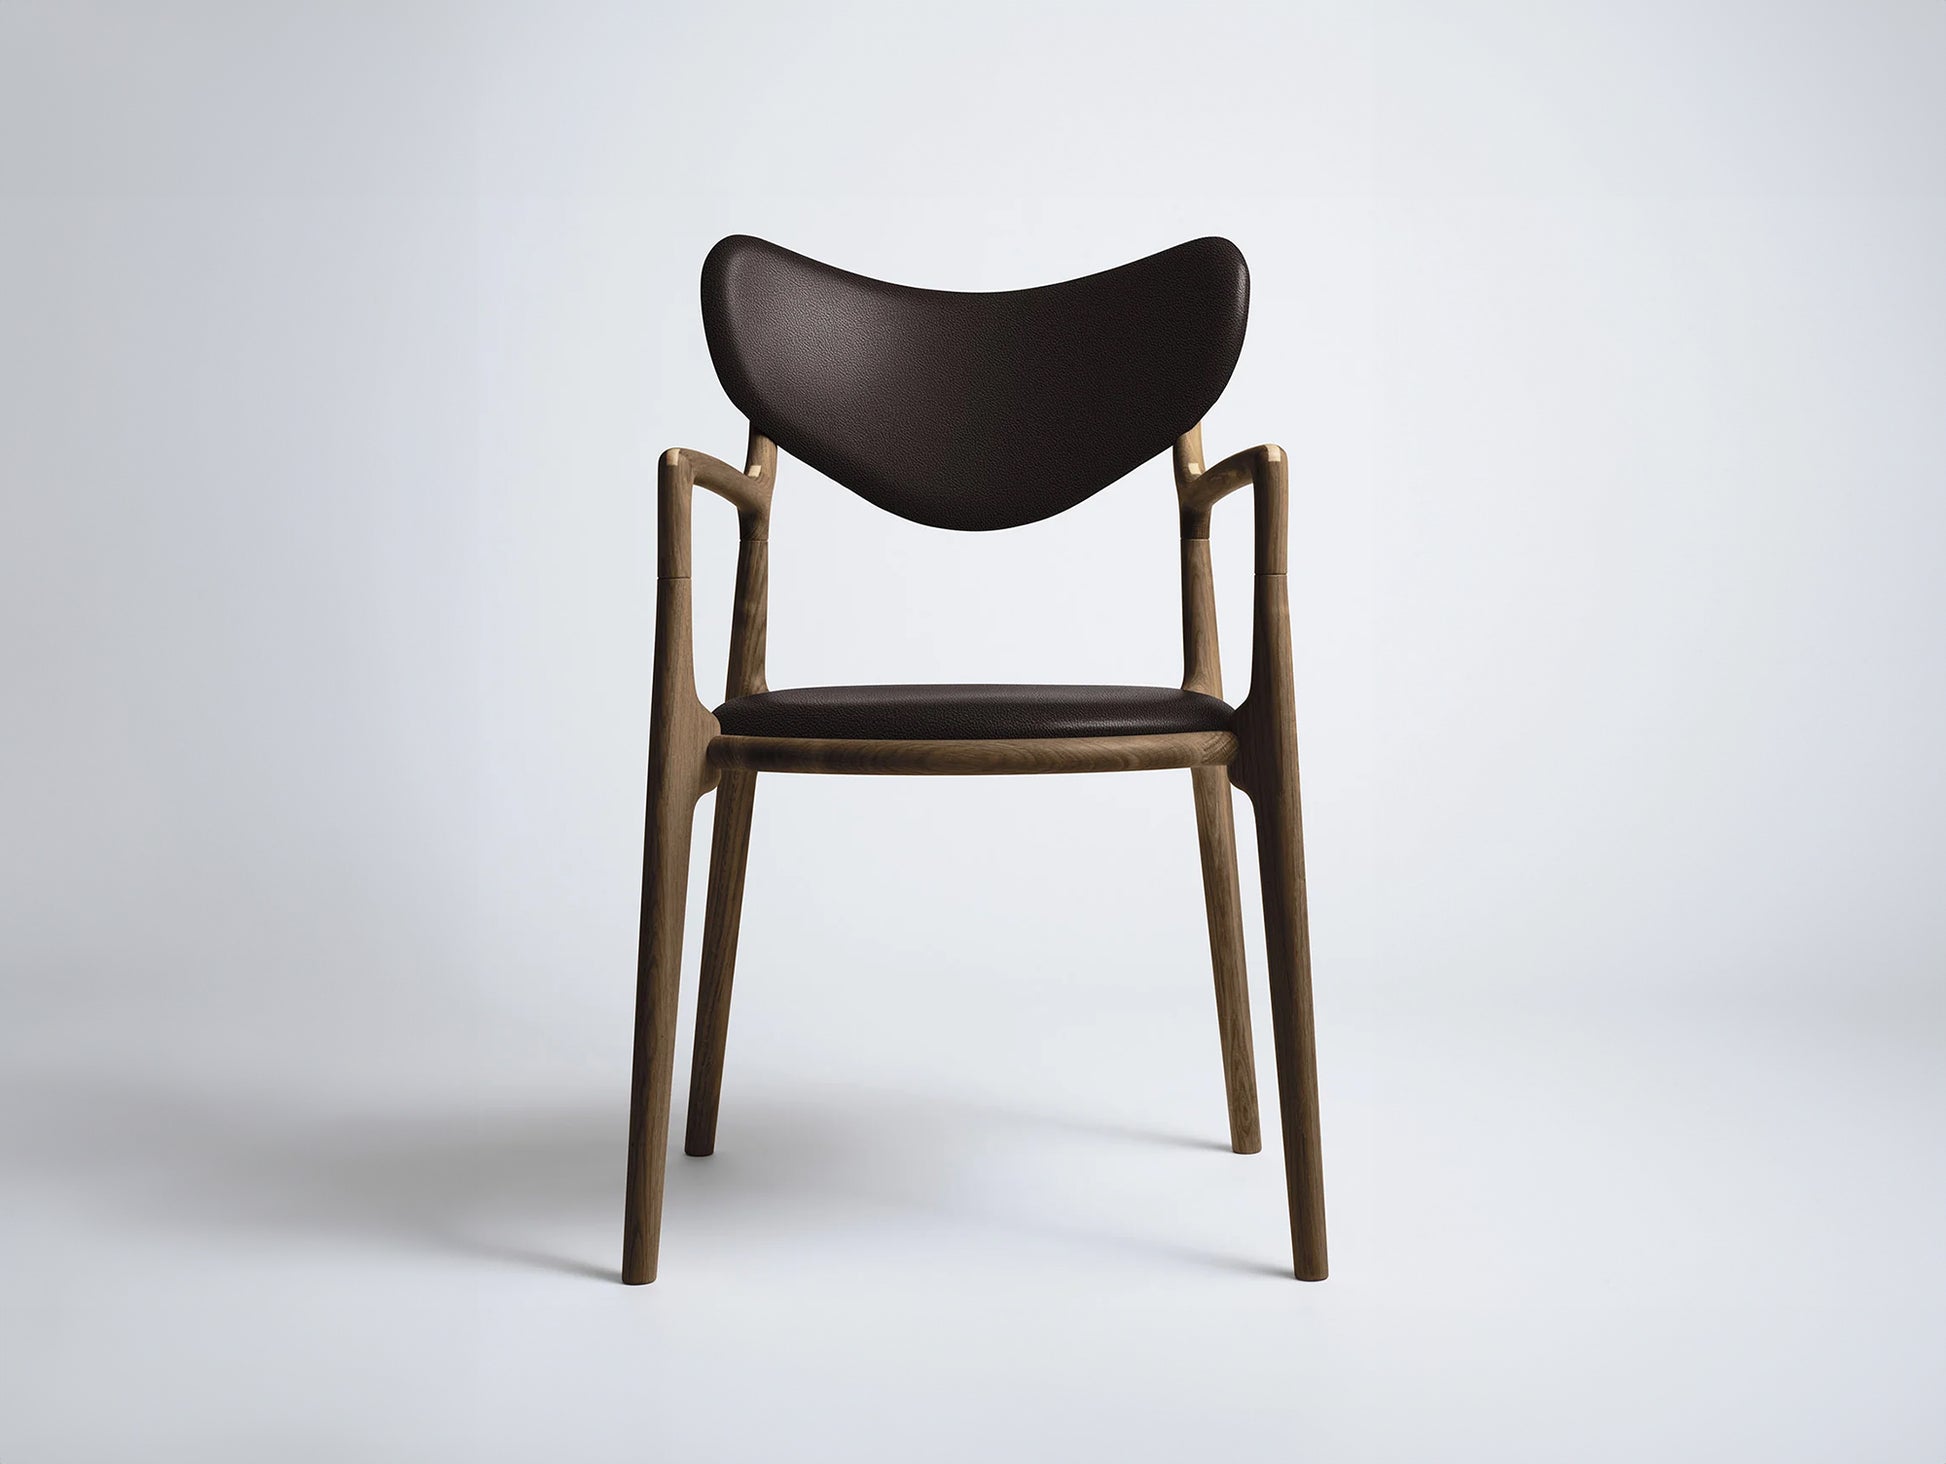 Salon Chair by Ro Collection  - Smoked Oak / Standard Dark Brown